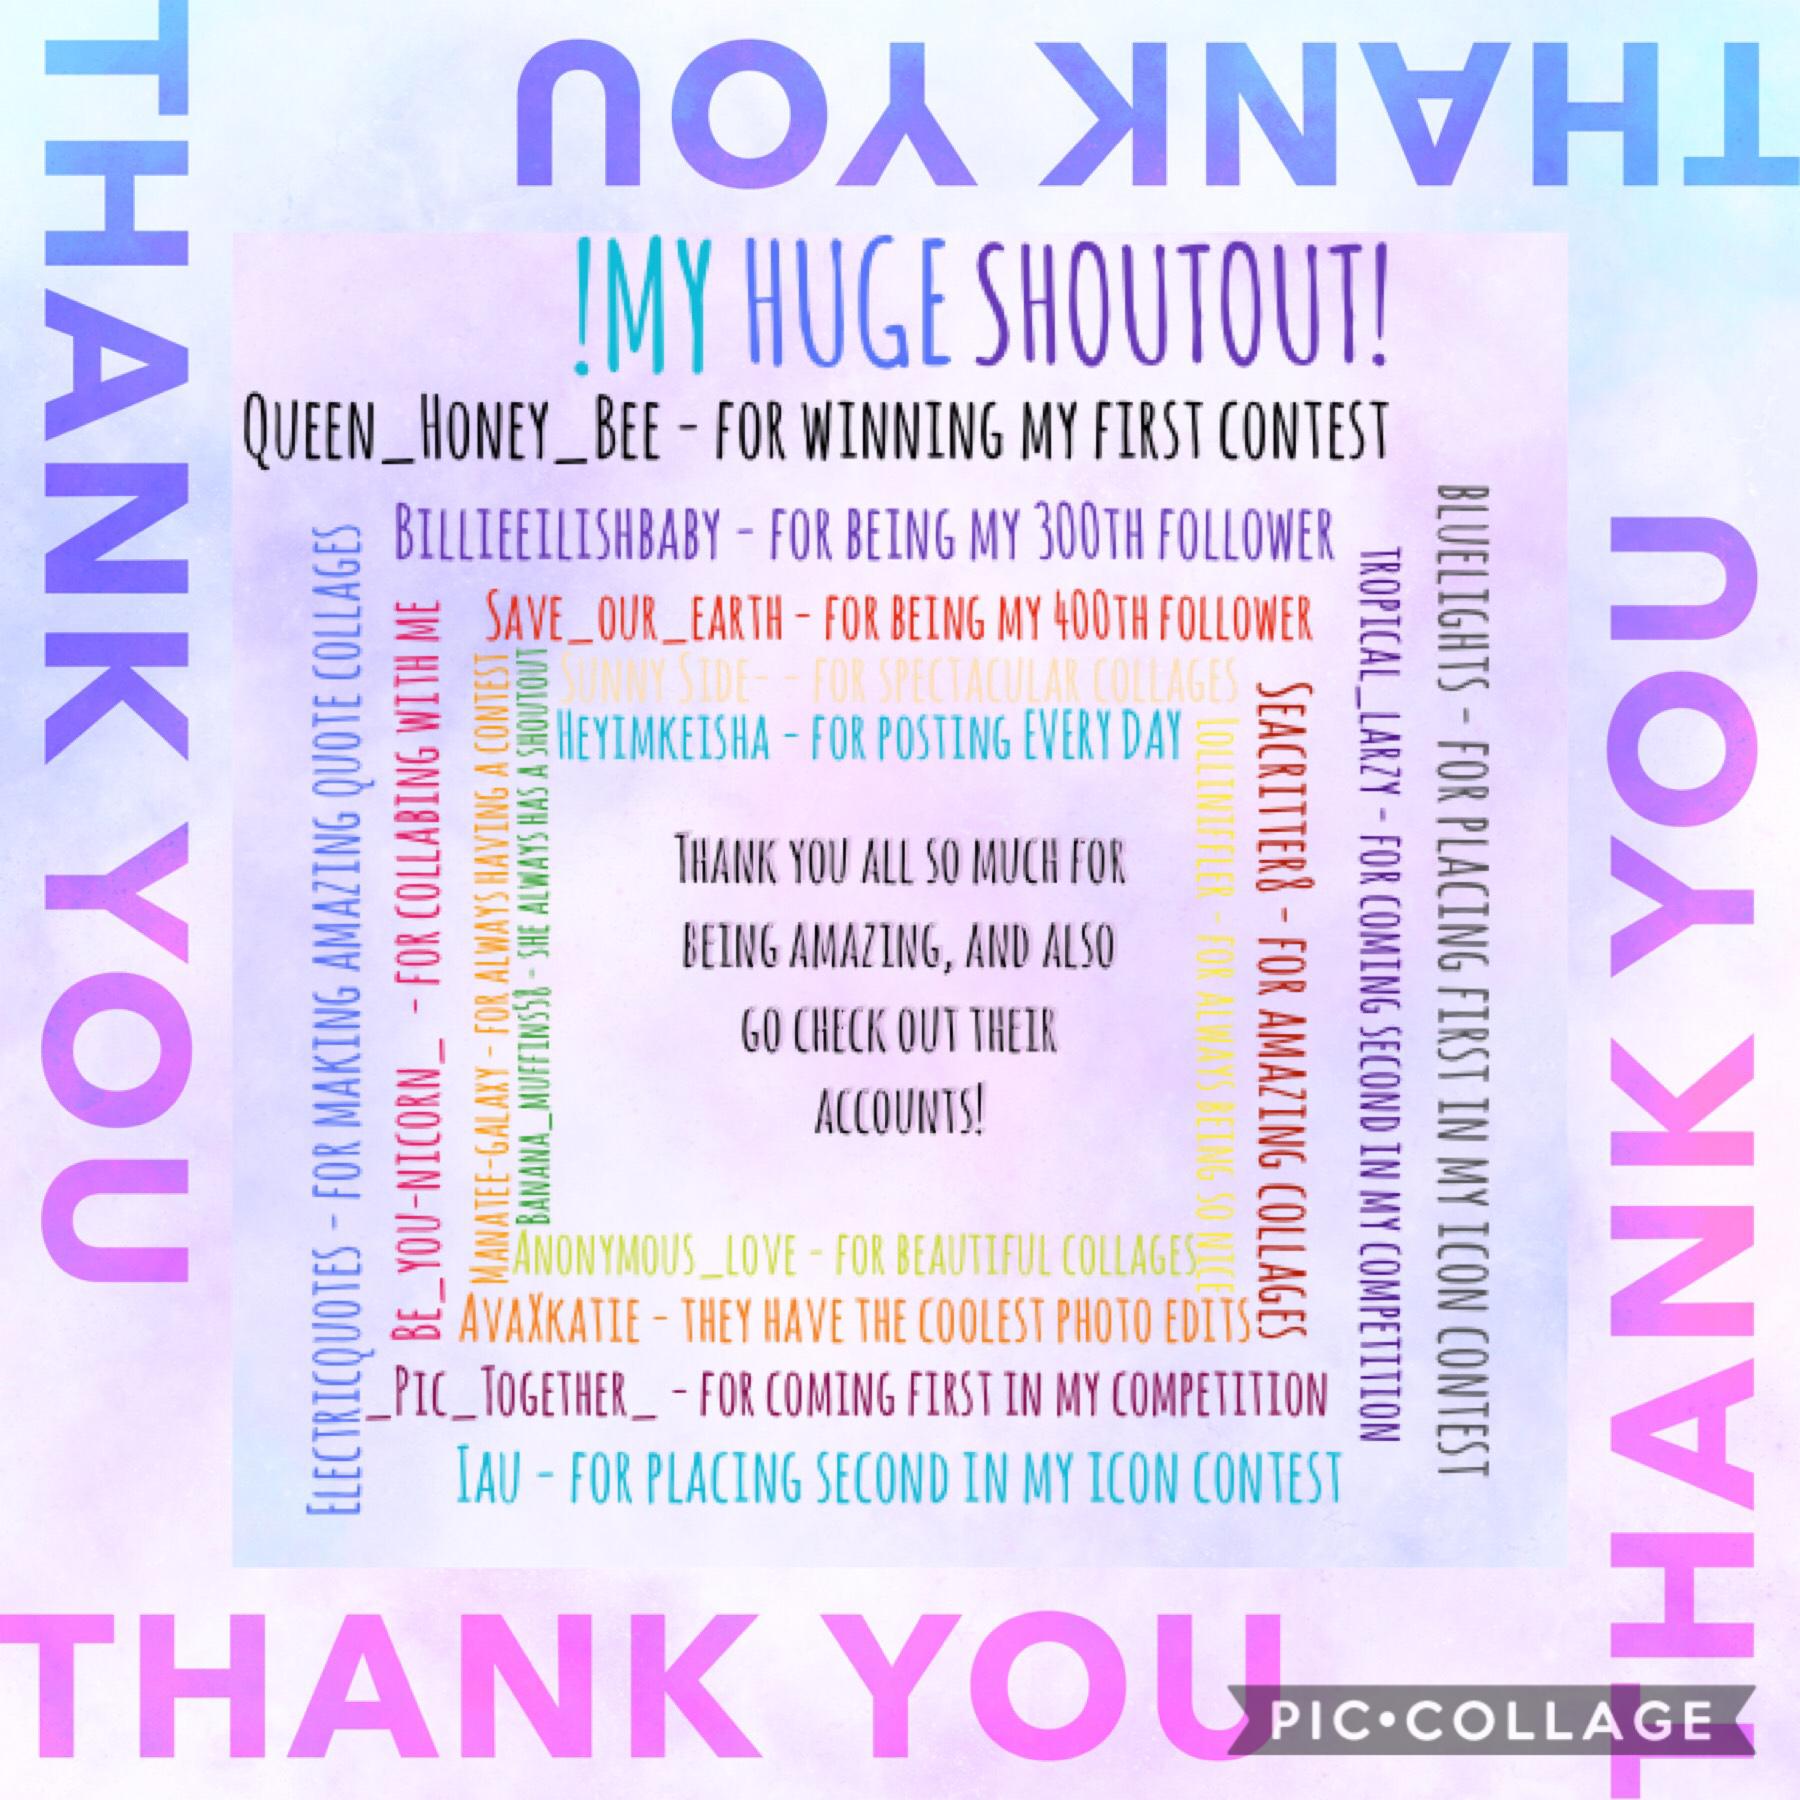 I have been promising this for ages! And here it is! Congratulations to all who got a shout out! If I didn't give you a shout out I hold nothing against you, still love you 💕 